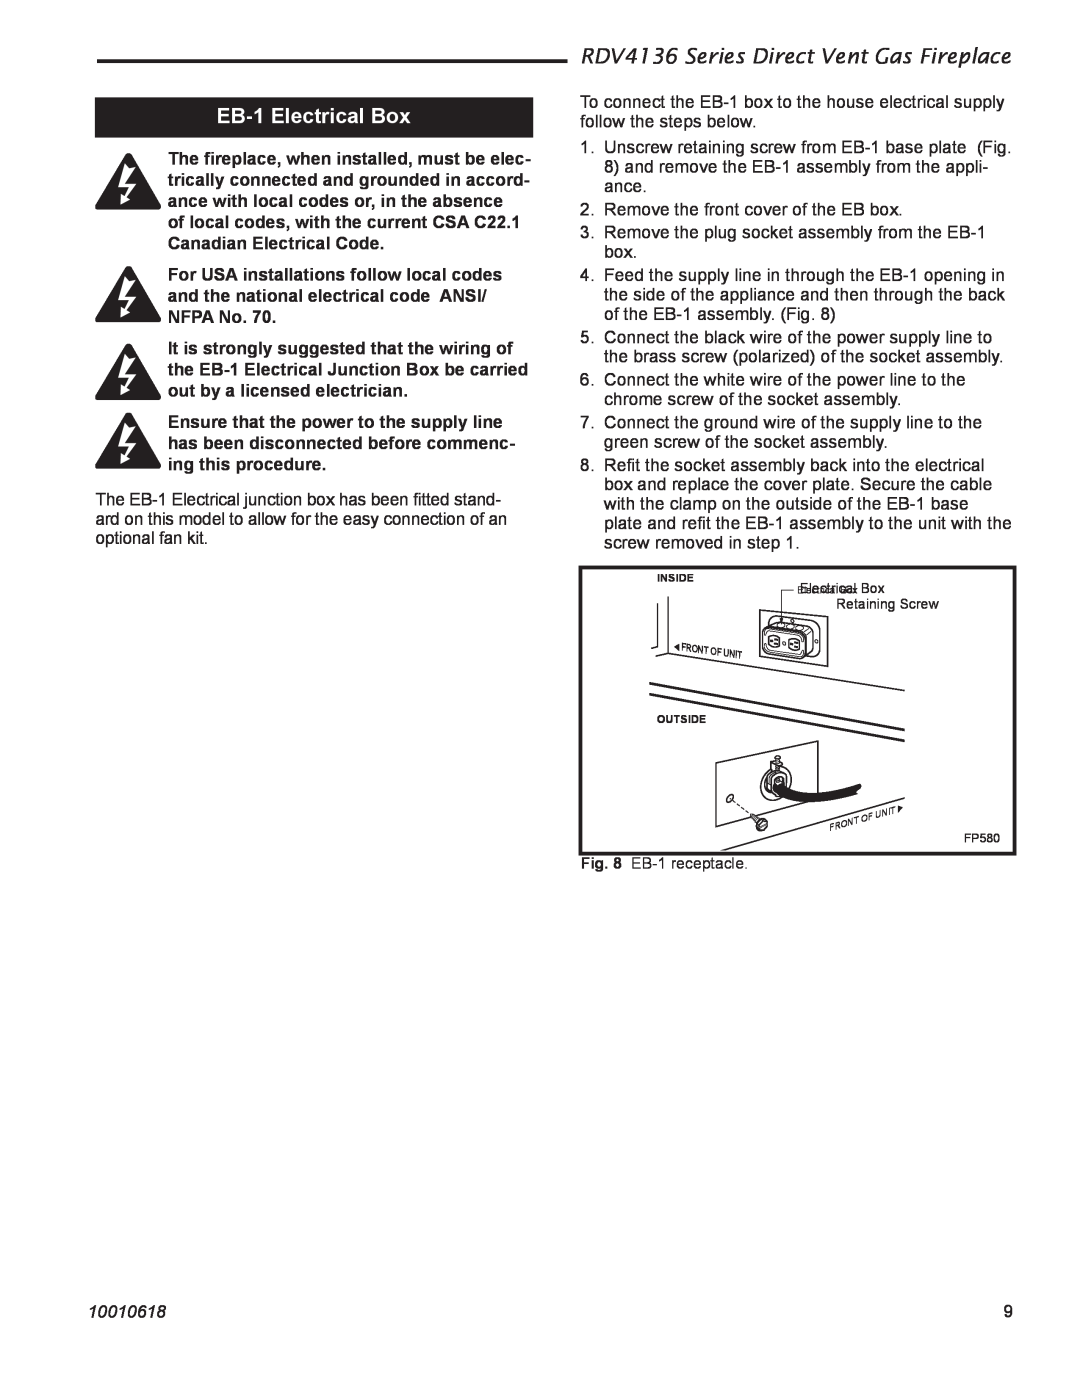 Majestic Appliances installation instructions EB-1Electrical Box, RDV4136 Series Direct Vent Gas Fireplace, 10010618 